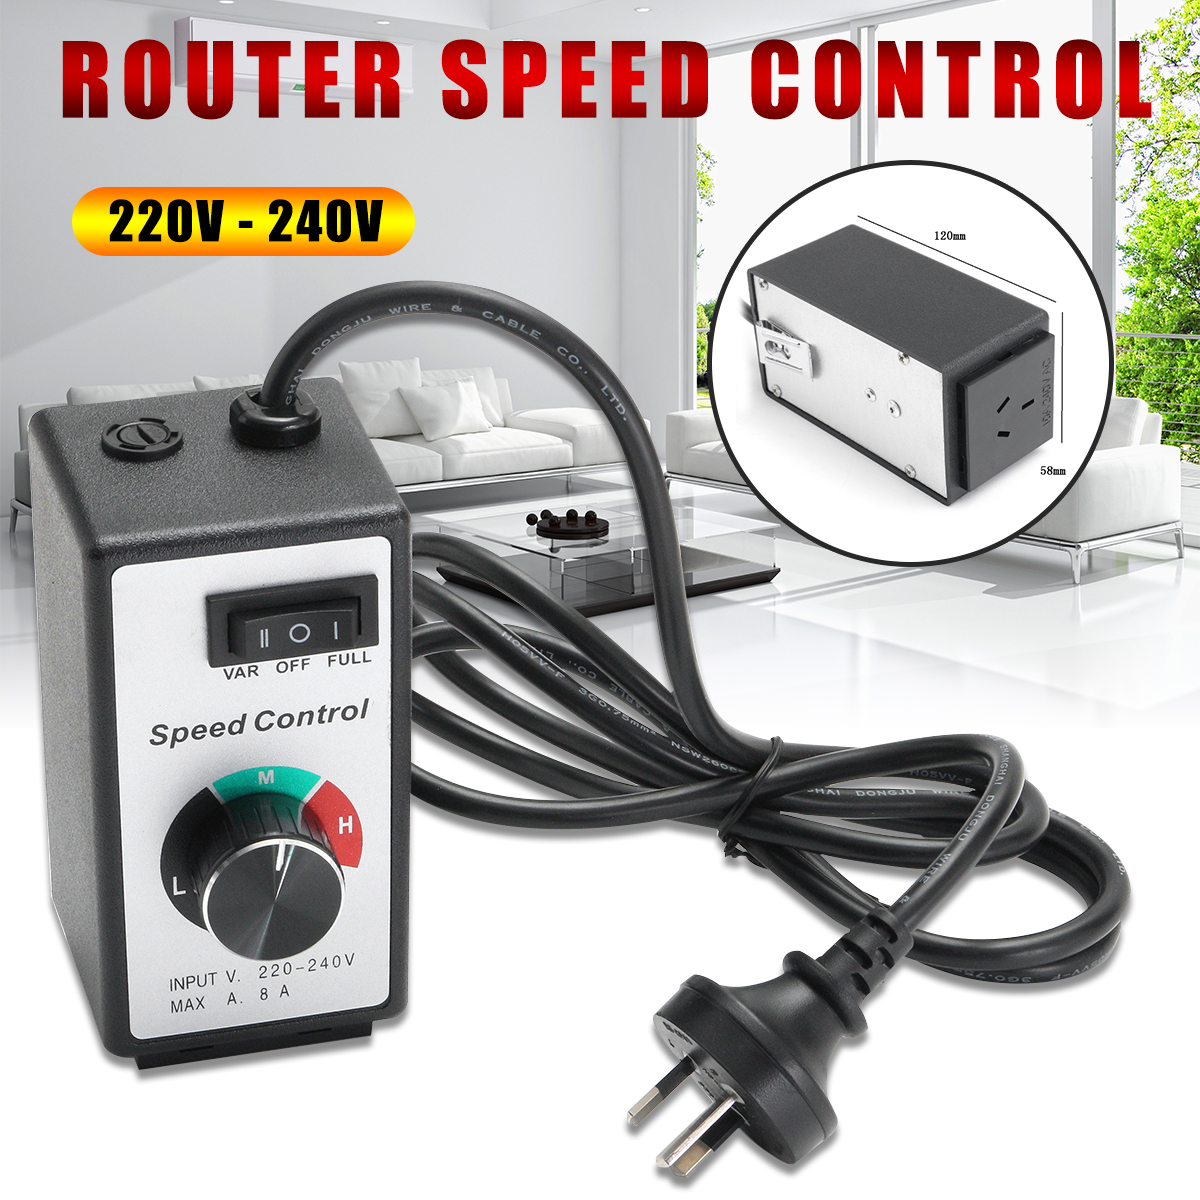 220 V-240 V 8A Router Speed Control Variabele Controller Motor AC Rheostat Tool Voor Verlichting Fans Power Tools